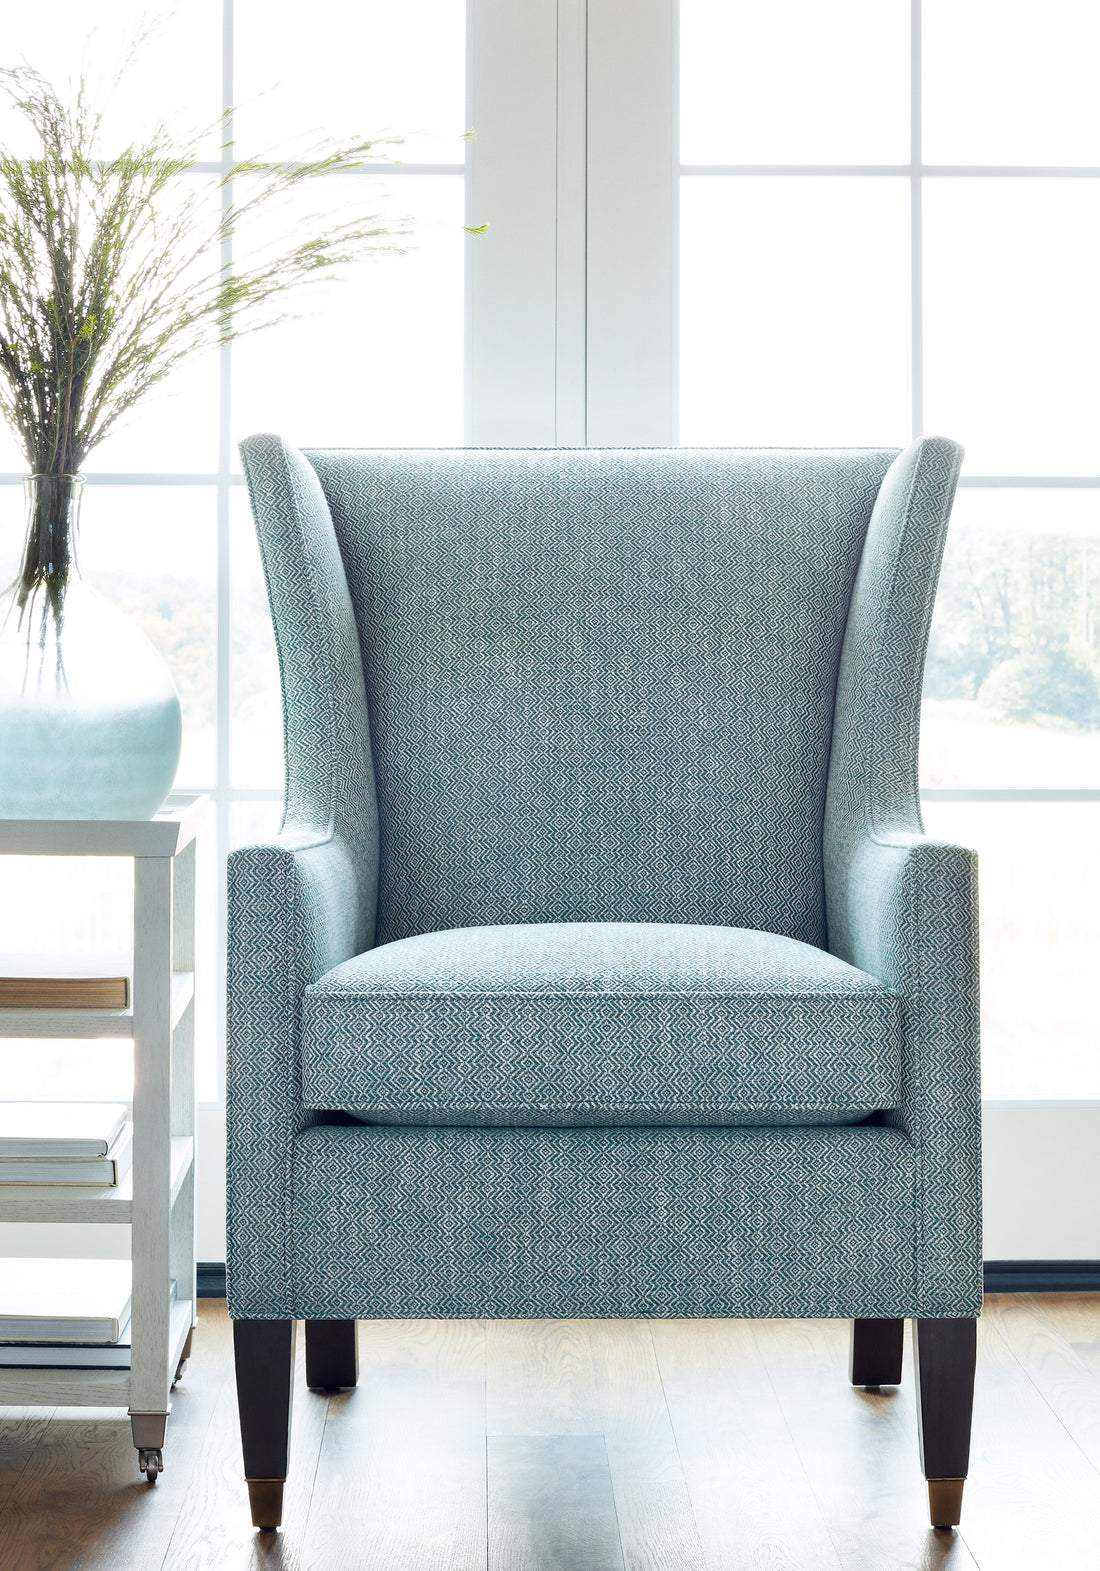 Princeton Wing Chair made with Thibaut Kingsley woven fabric in Teal color - pattern number W74069